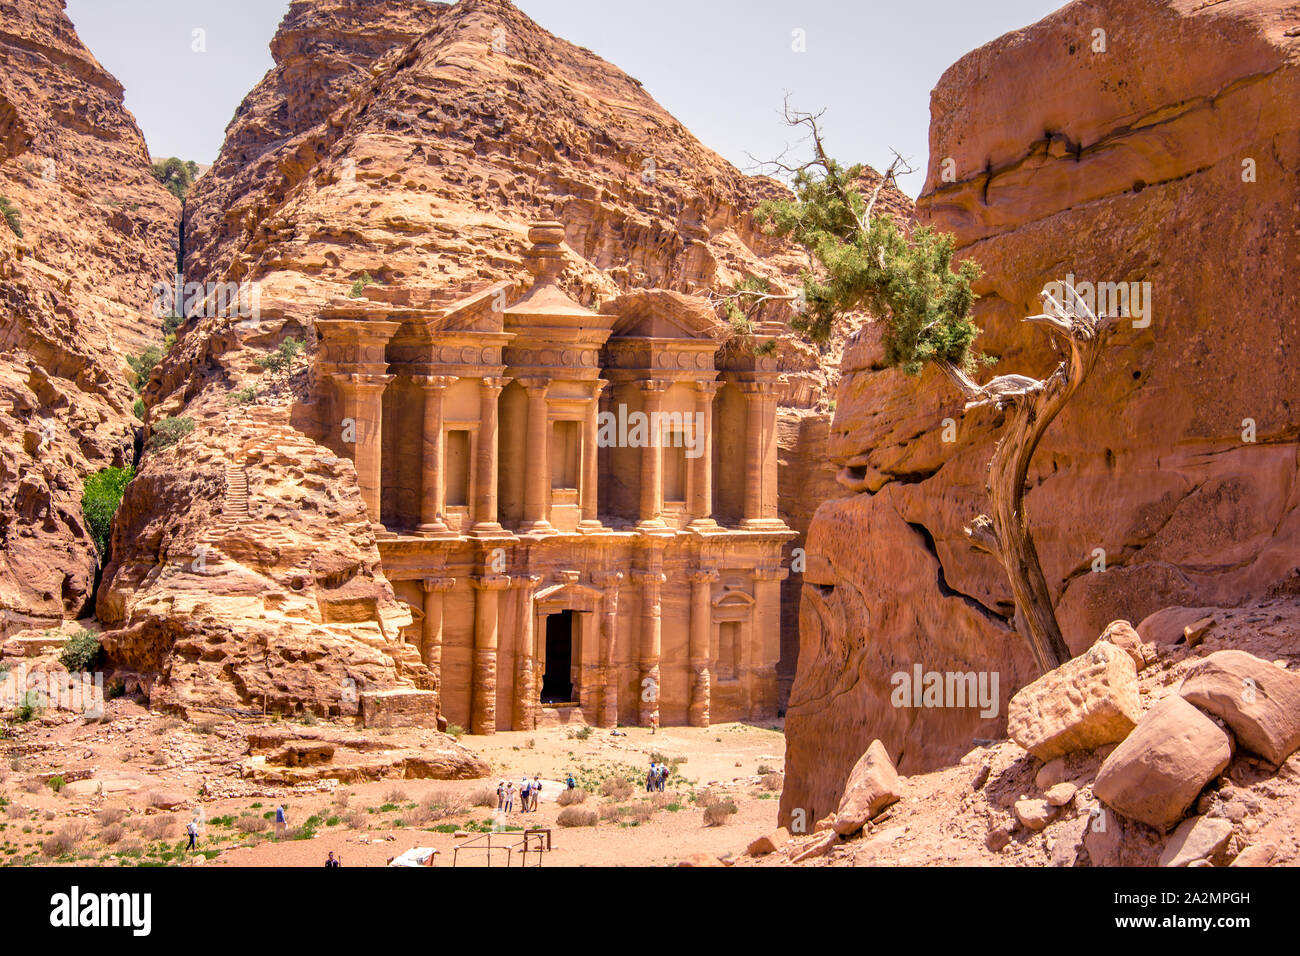 Giant temple of Monastery in sandstone at the ancient Bedouin city of Petra, Jordan Stock Photo